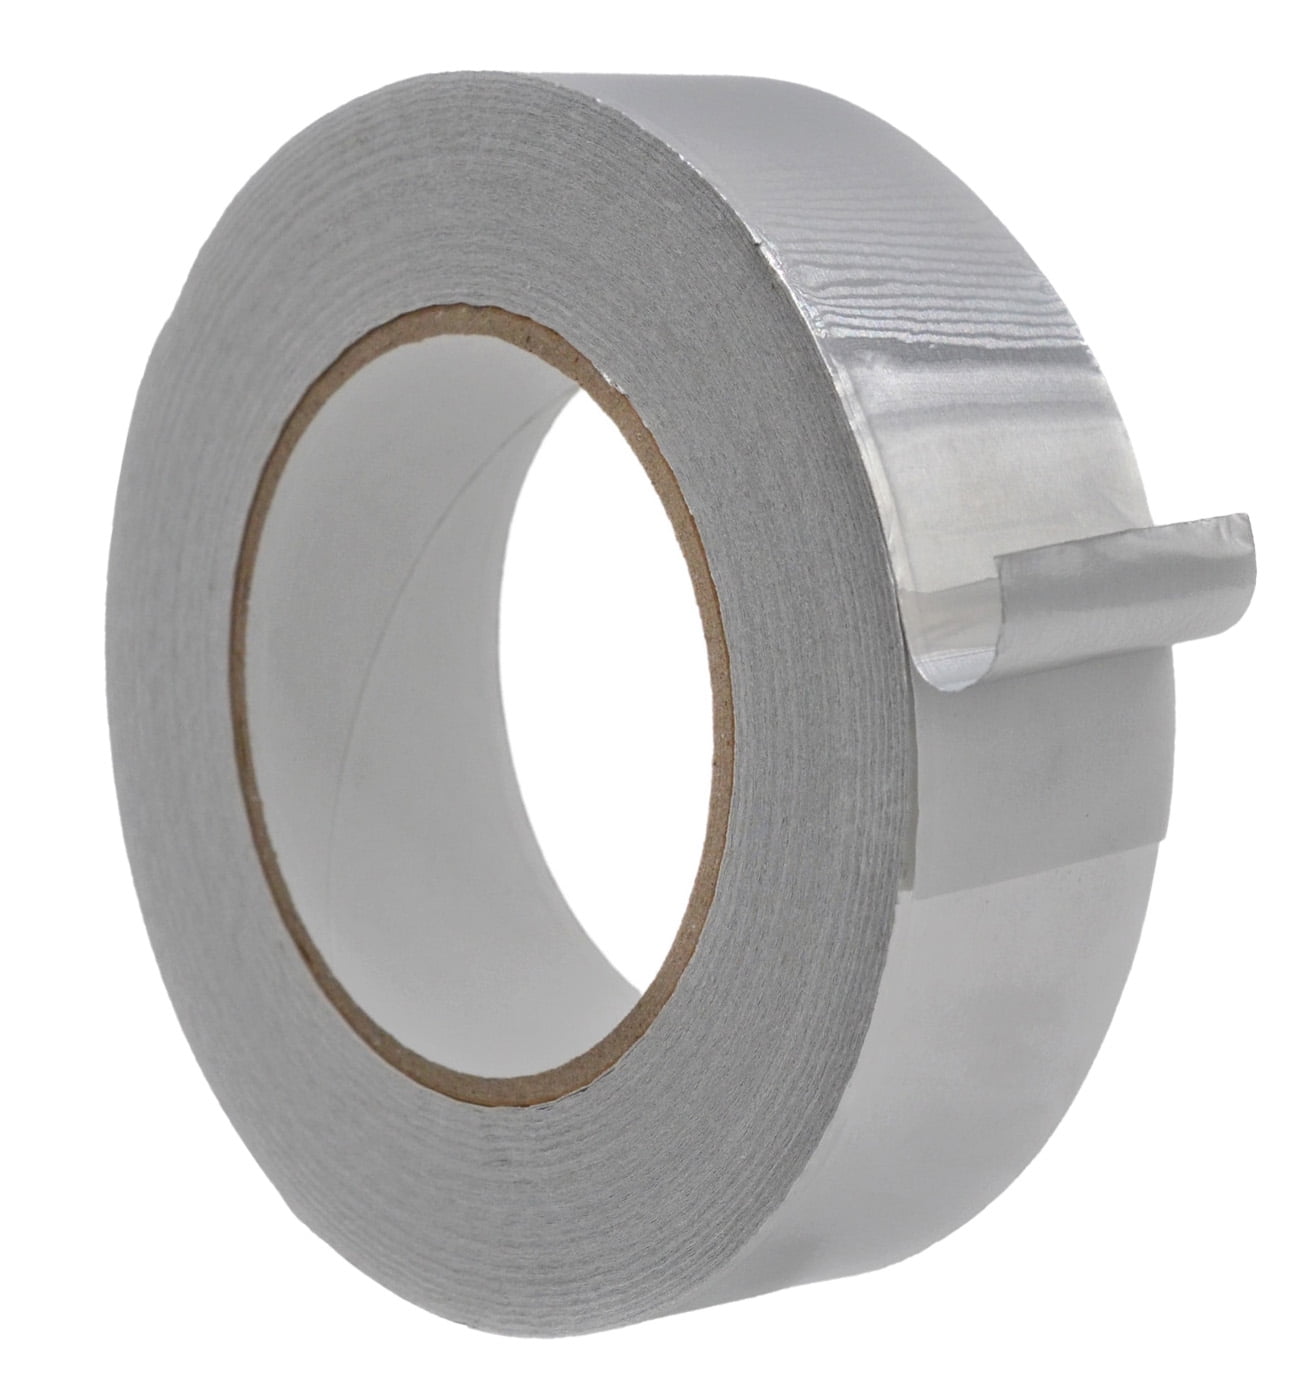 Aluminum Foil Adhesive Tape - 4 x 55yds ( 25mm x 50m) Silver - Ship From  USA